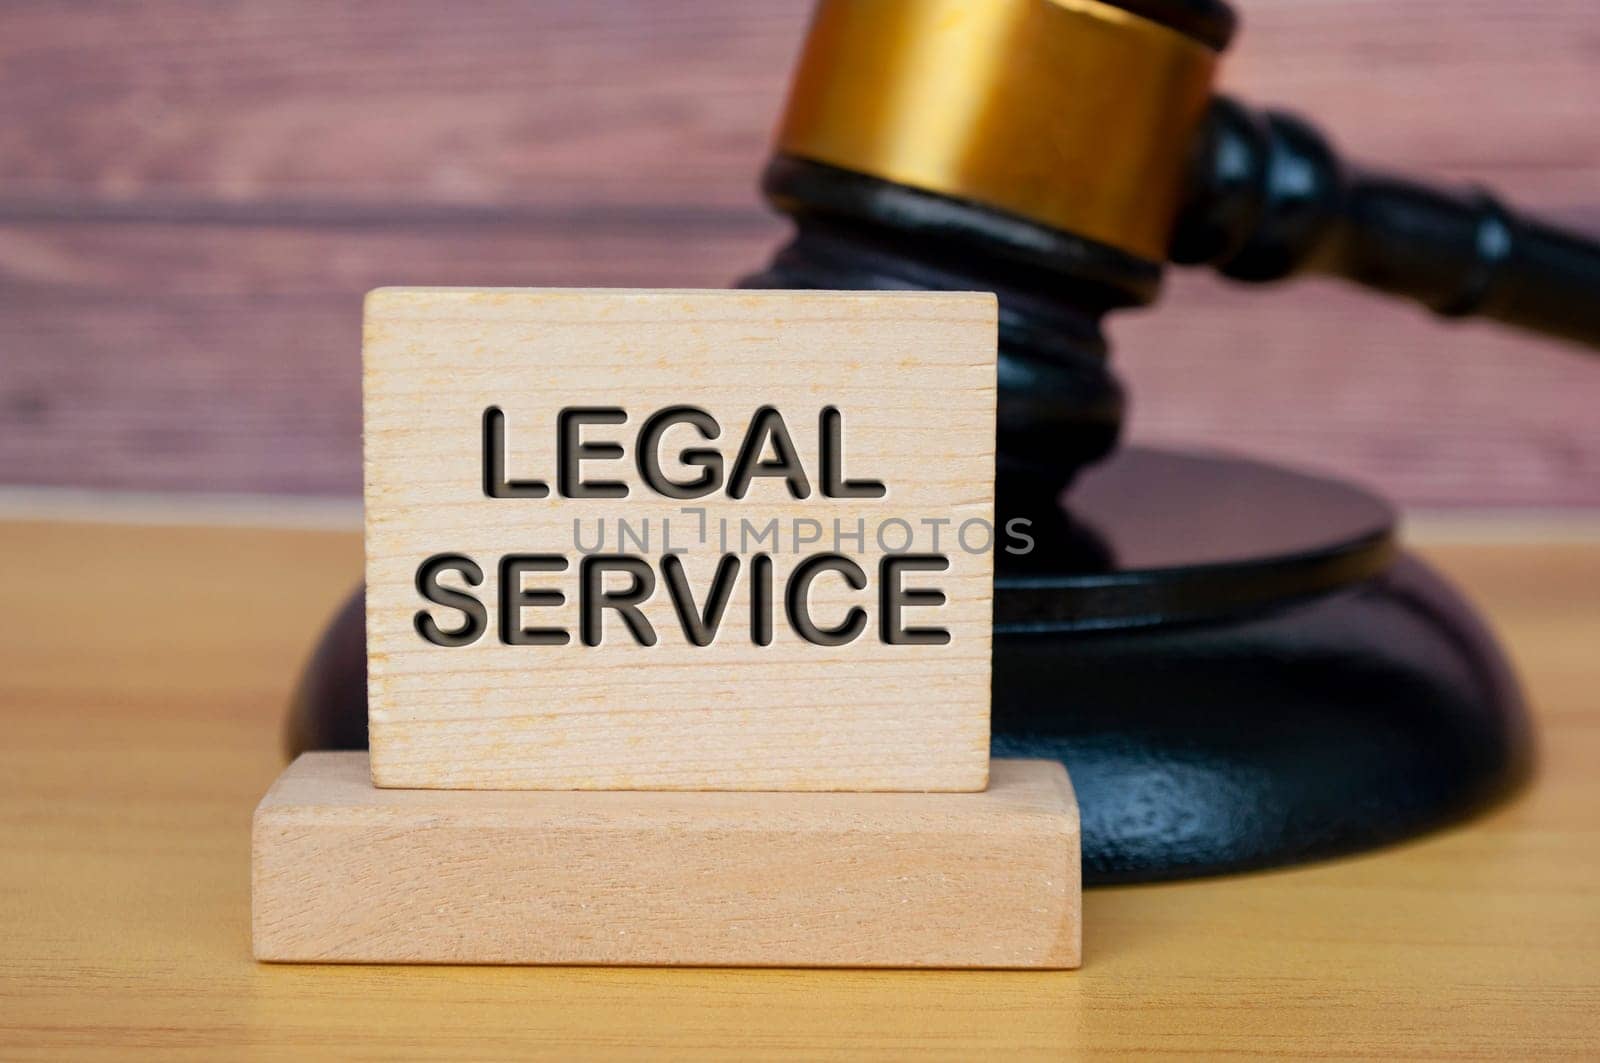 Legal service text engraved on wooden block with gavel background. Legal and law concept